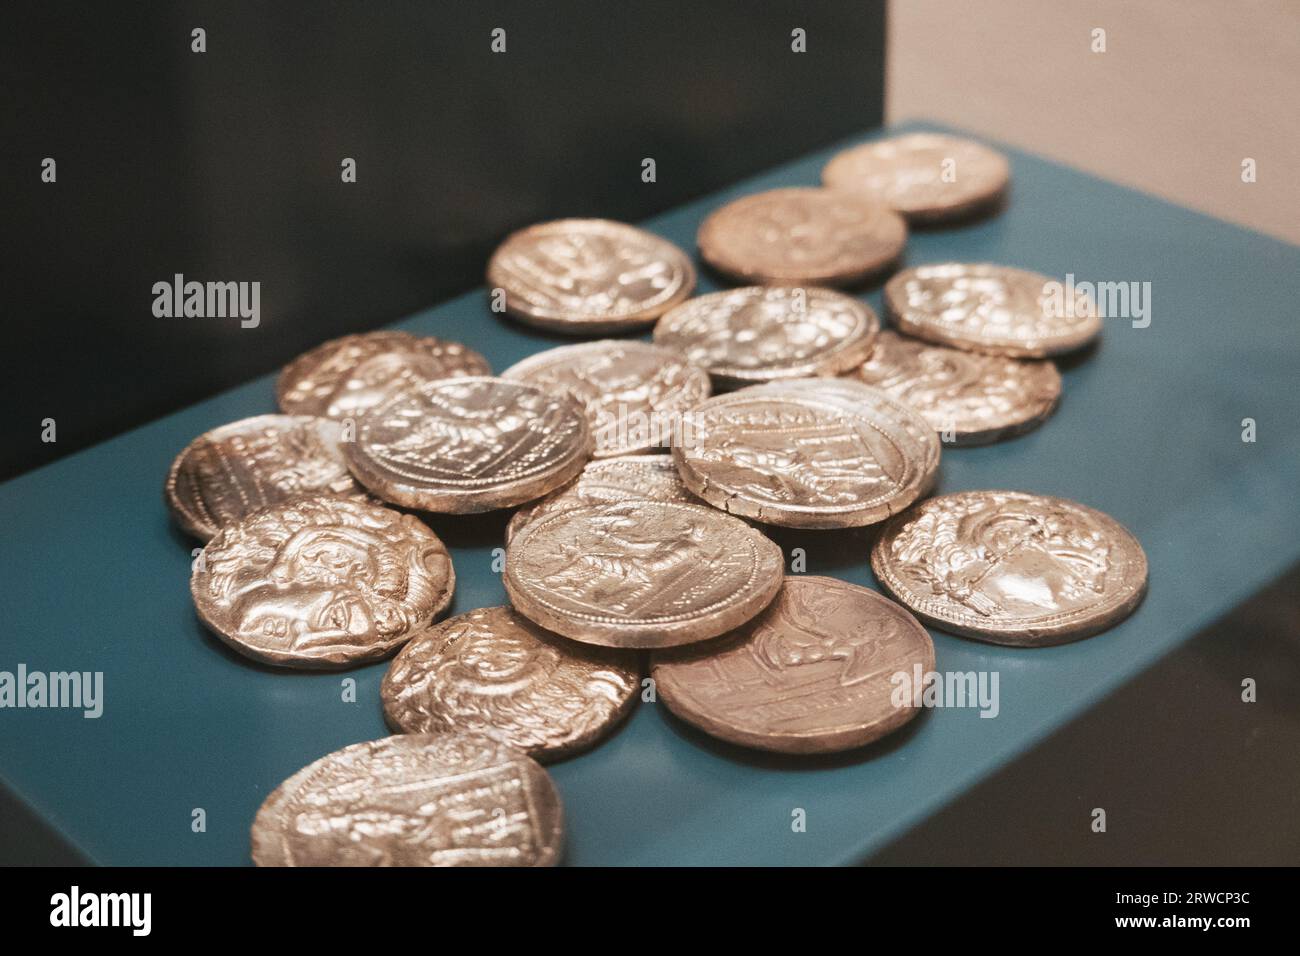 ancient coins on display at the Bahrain Fort Museum, Manama, Bahrain Stock Photo